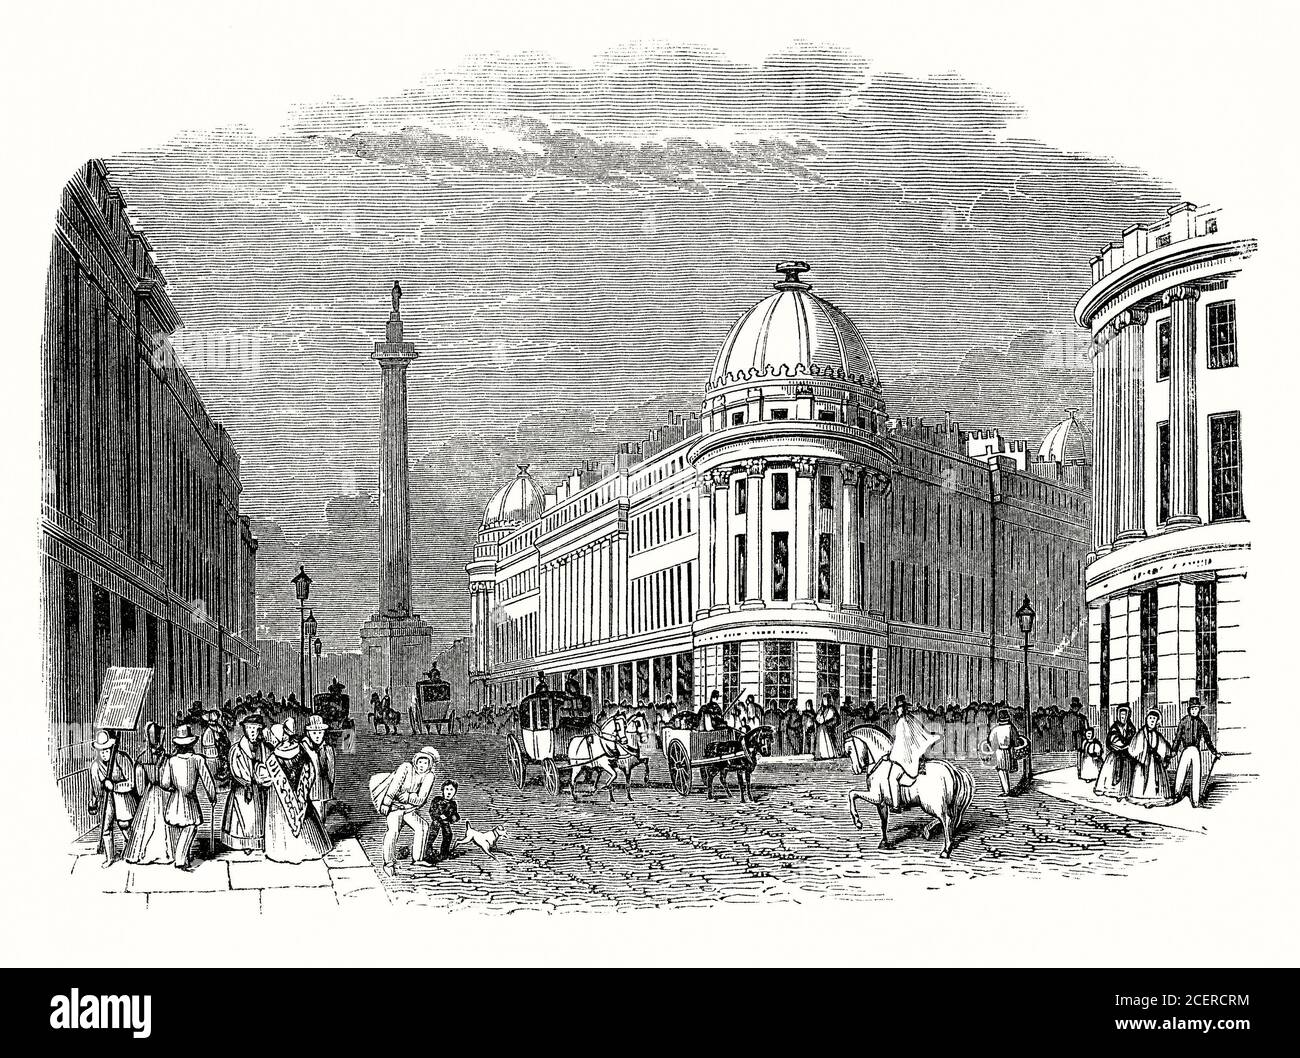 An old engraving of a busy street scene on Grainger Street, Newcastle upon Tyne, Tyne and Wear, England, UK during the Victorian era. Grainger Town is the historic heart of Newcastle incorporating classical streets built by Richard Grainger, a builder and developer, between 1824 and 1841. Some of Newcastle's finest buildings and streets lie within the area ('Tyneside Classical' architecture). Grey's Monument (background) is a monument to Charles Grey, 2nd Earl Grey built in 1838 – created by Edward Hodges Baily (famous for Nelson's statue in Trafalgar Square). Stock Photo